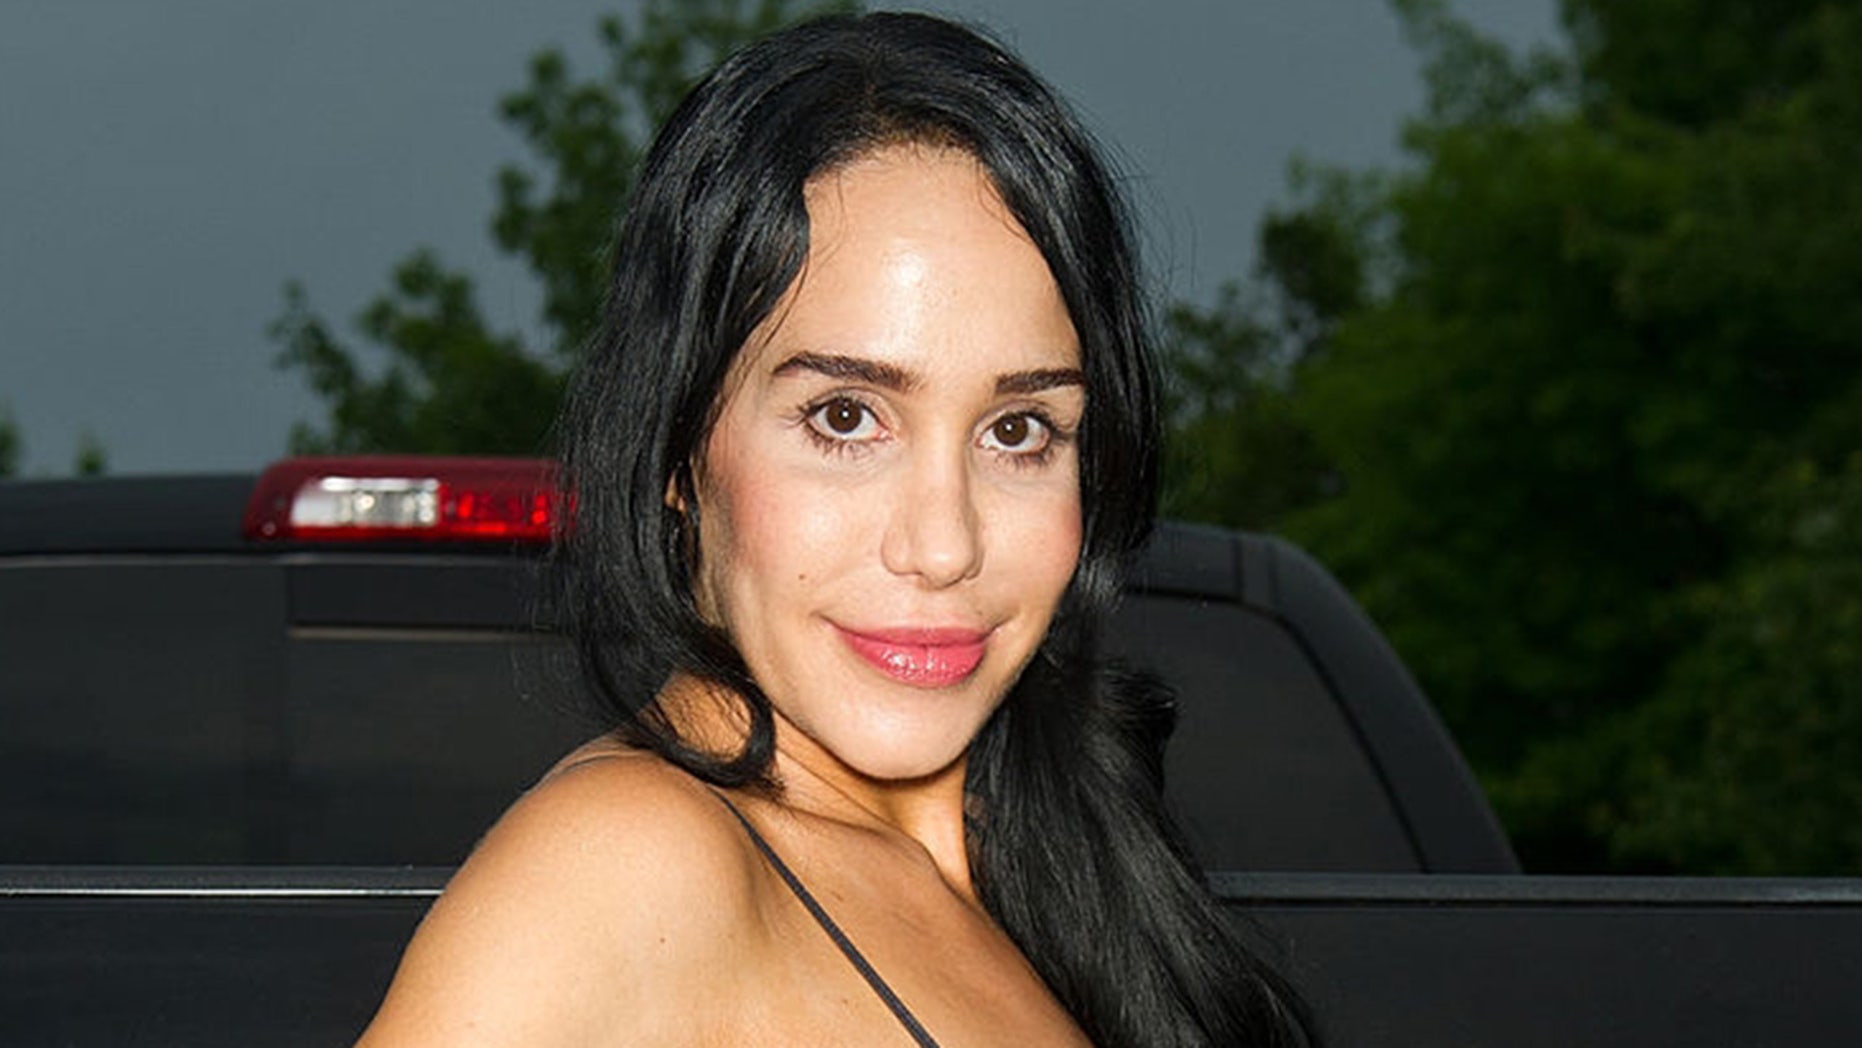 Octomom Fucked Porn - Octomom Nadya Suleman opens up about her porn past: 'I hit ...